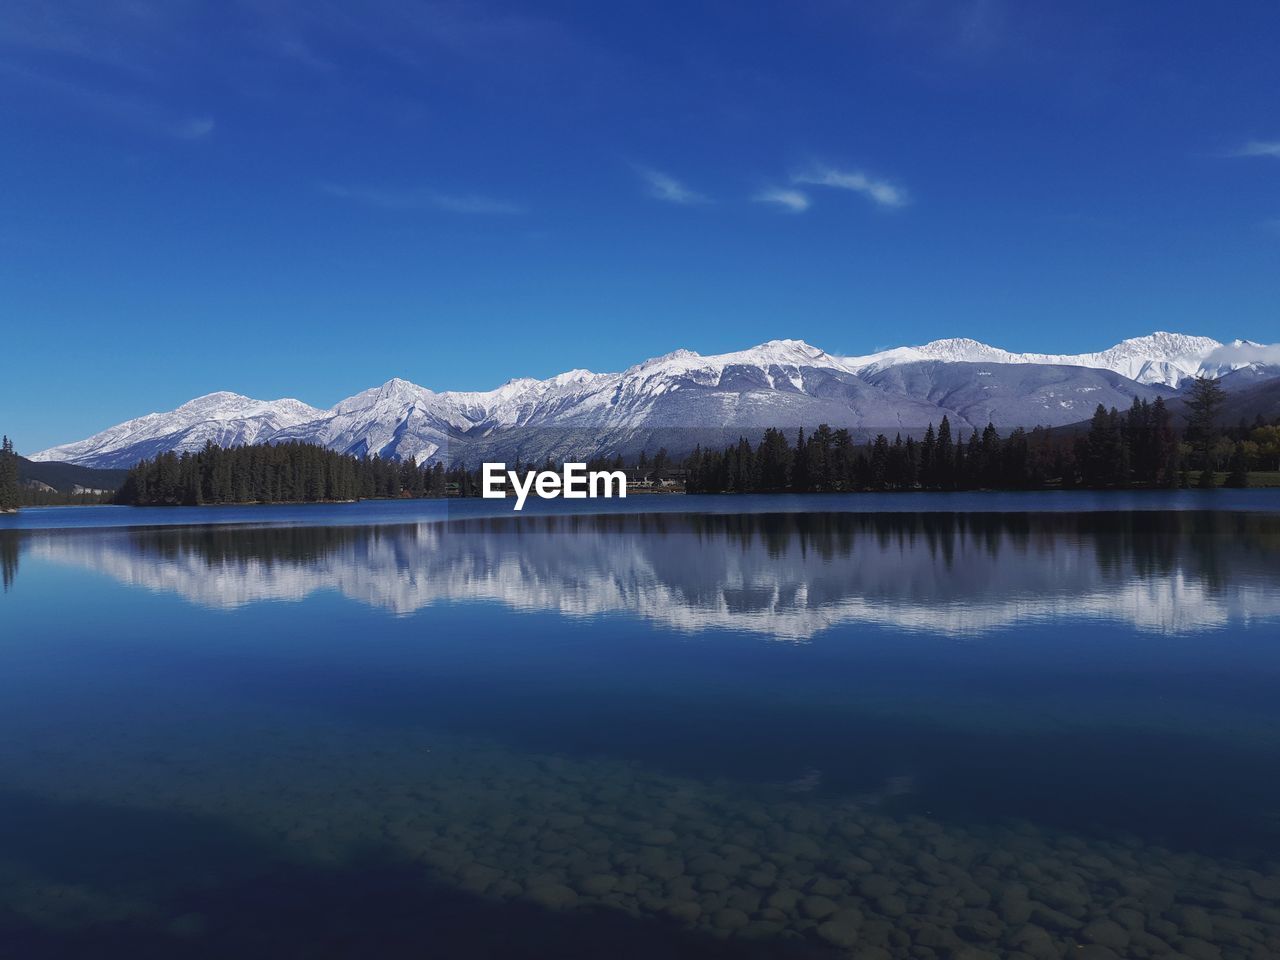 SCENIC VIEW OF LAKE BY MOUNTAINS AGAINST SKY